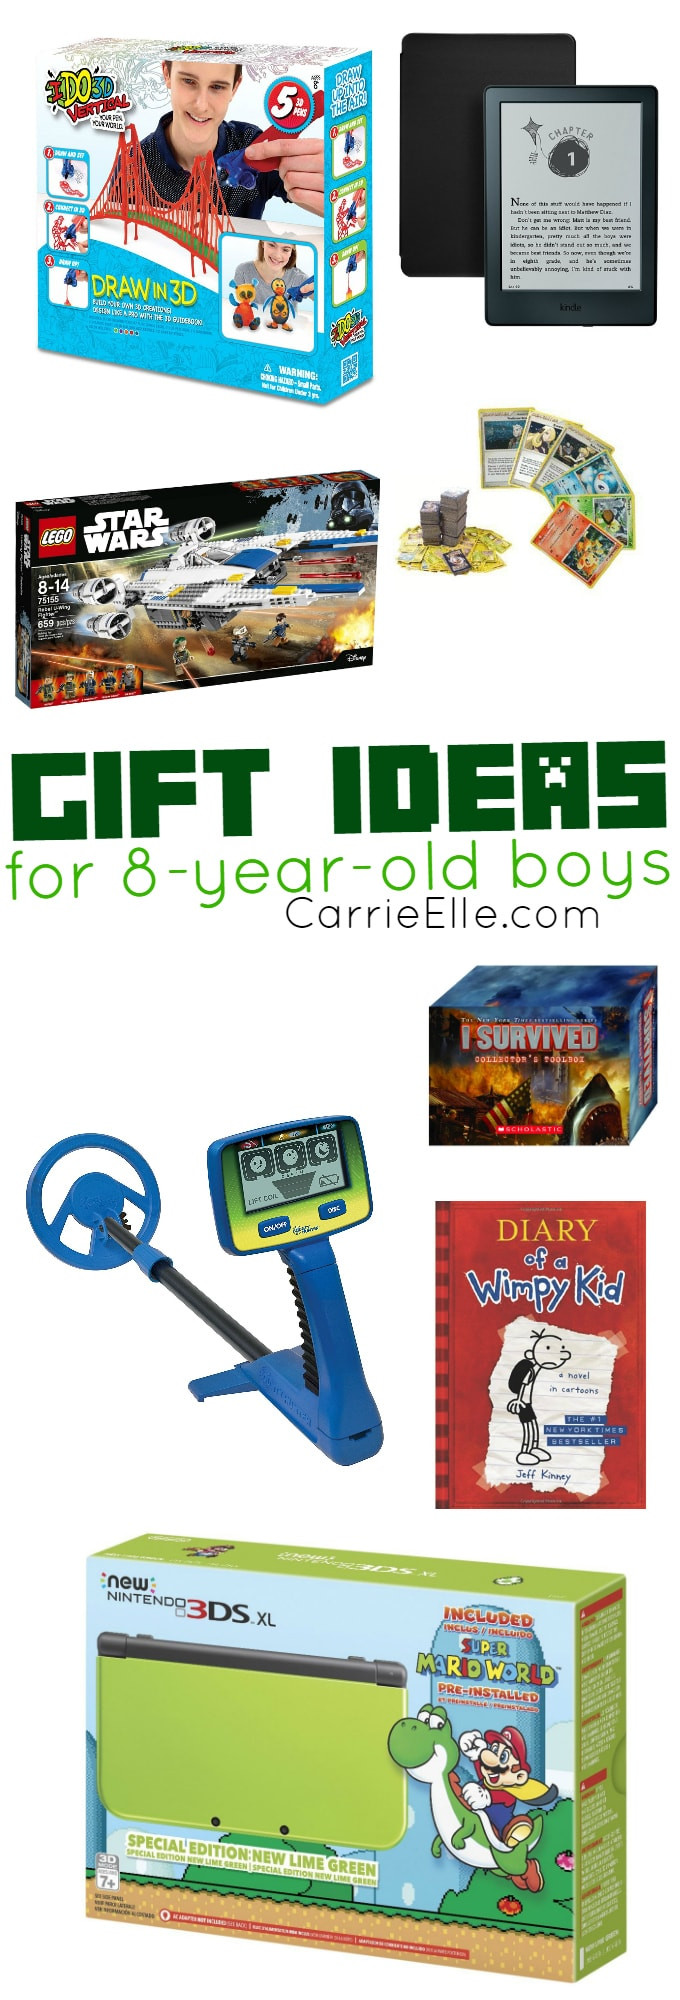 Gift Ideas For 11 Year Old Boys
 Gift Ideas for 8 Year Old Boys Carrie Elle